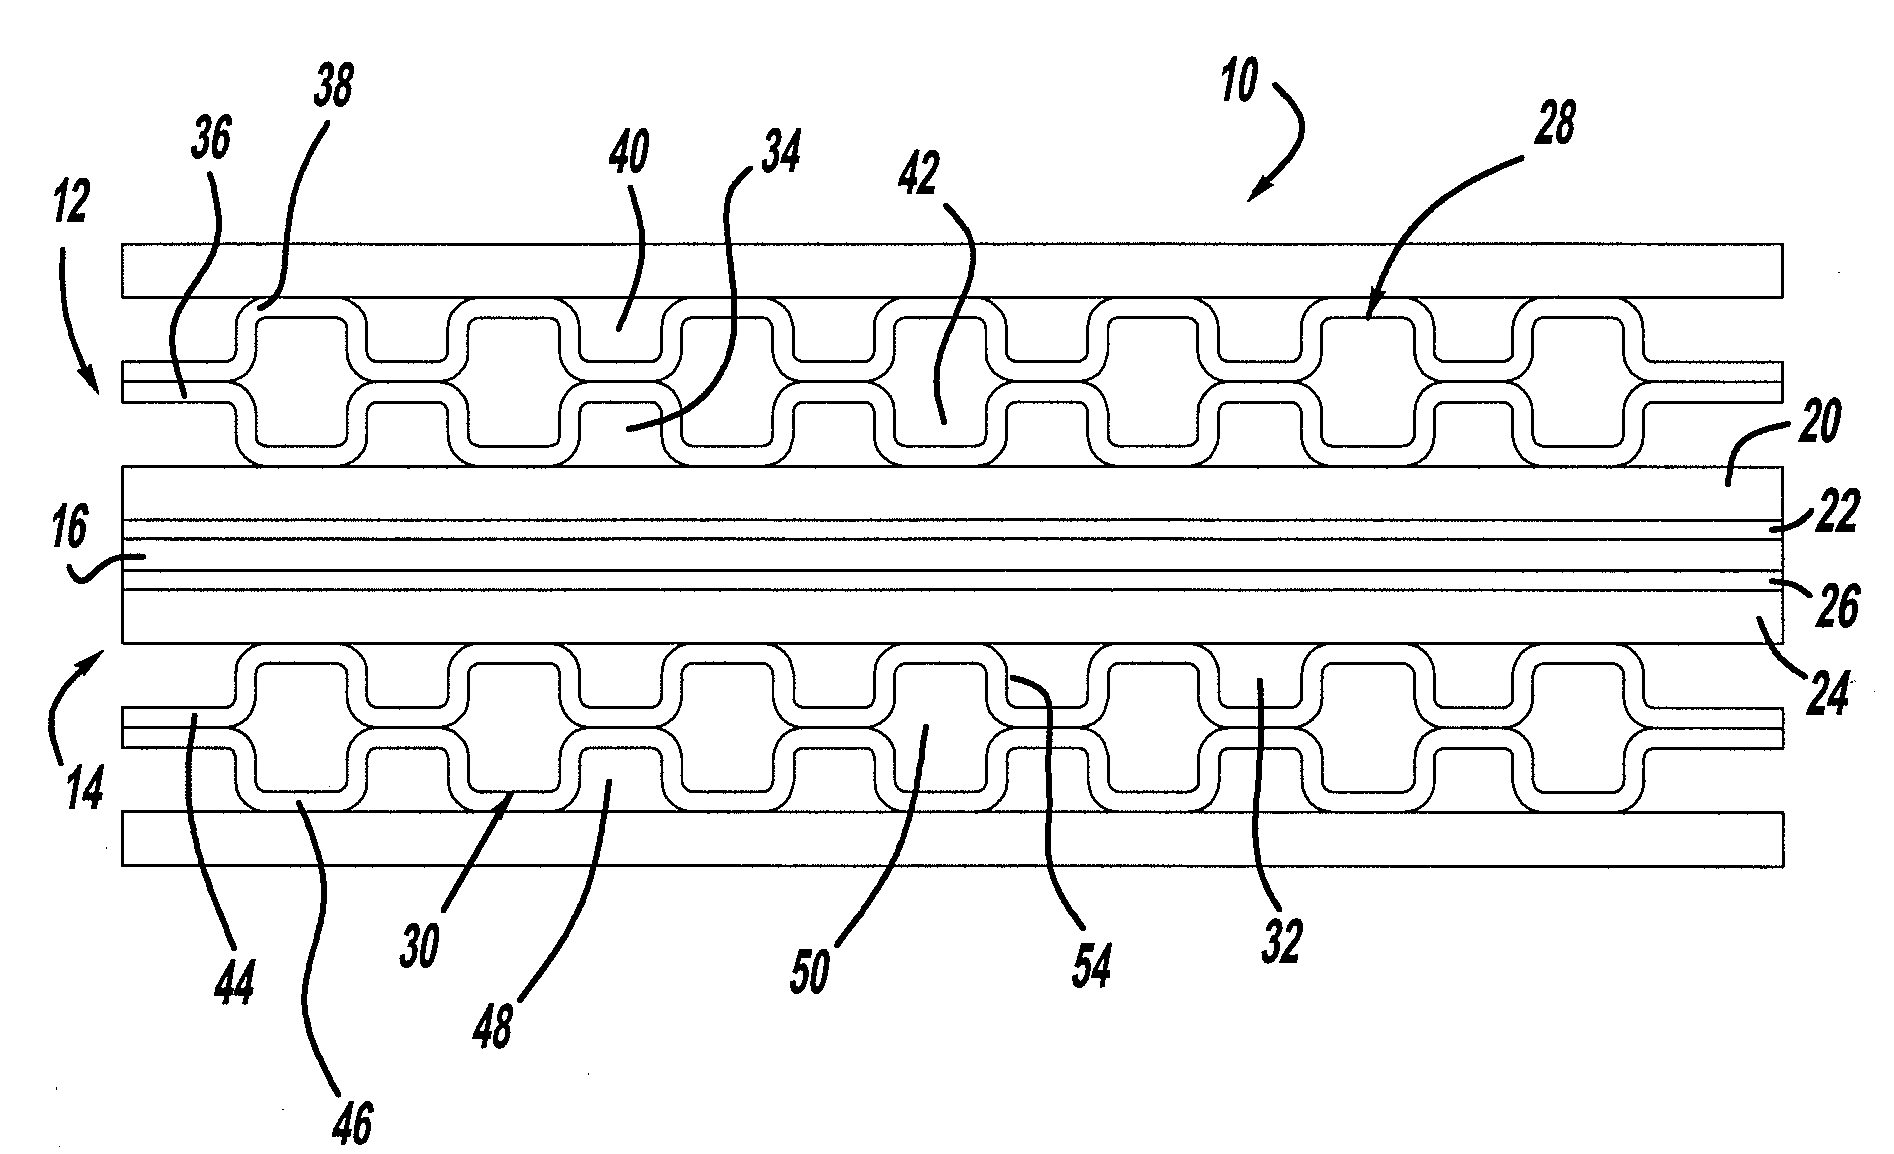 Fluorine Treatment of Polyelectrolyte Membranes